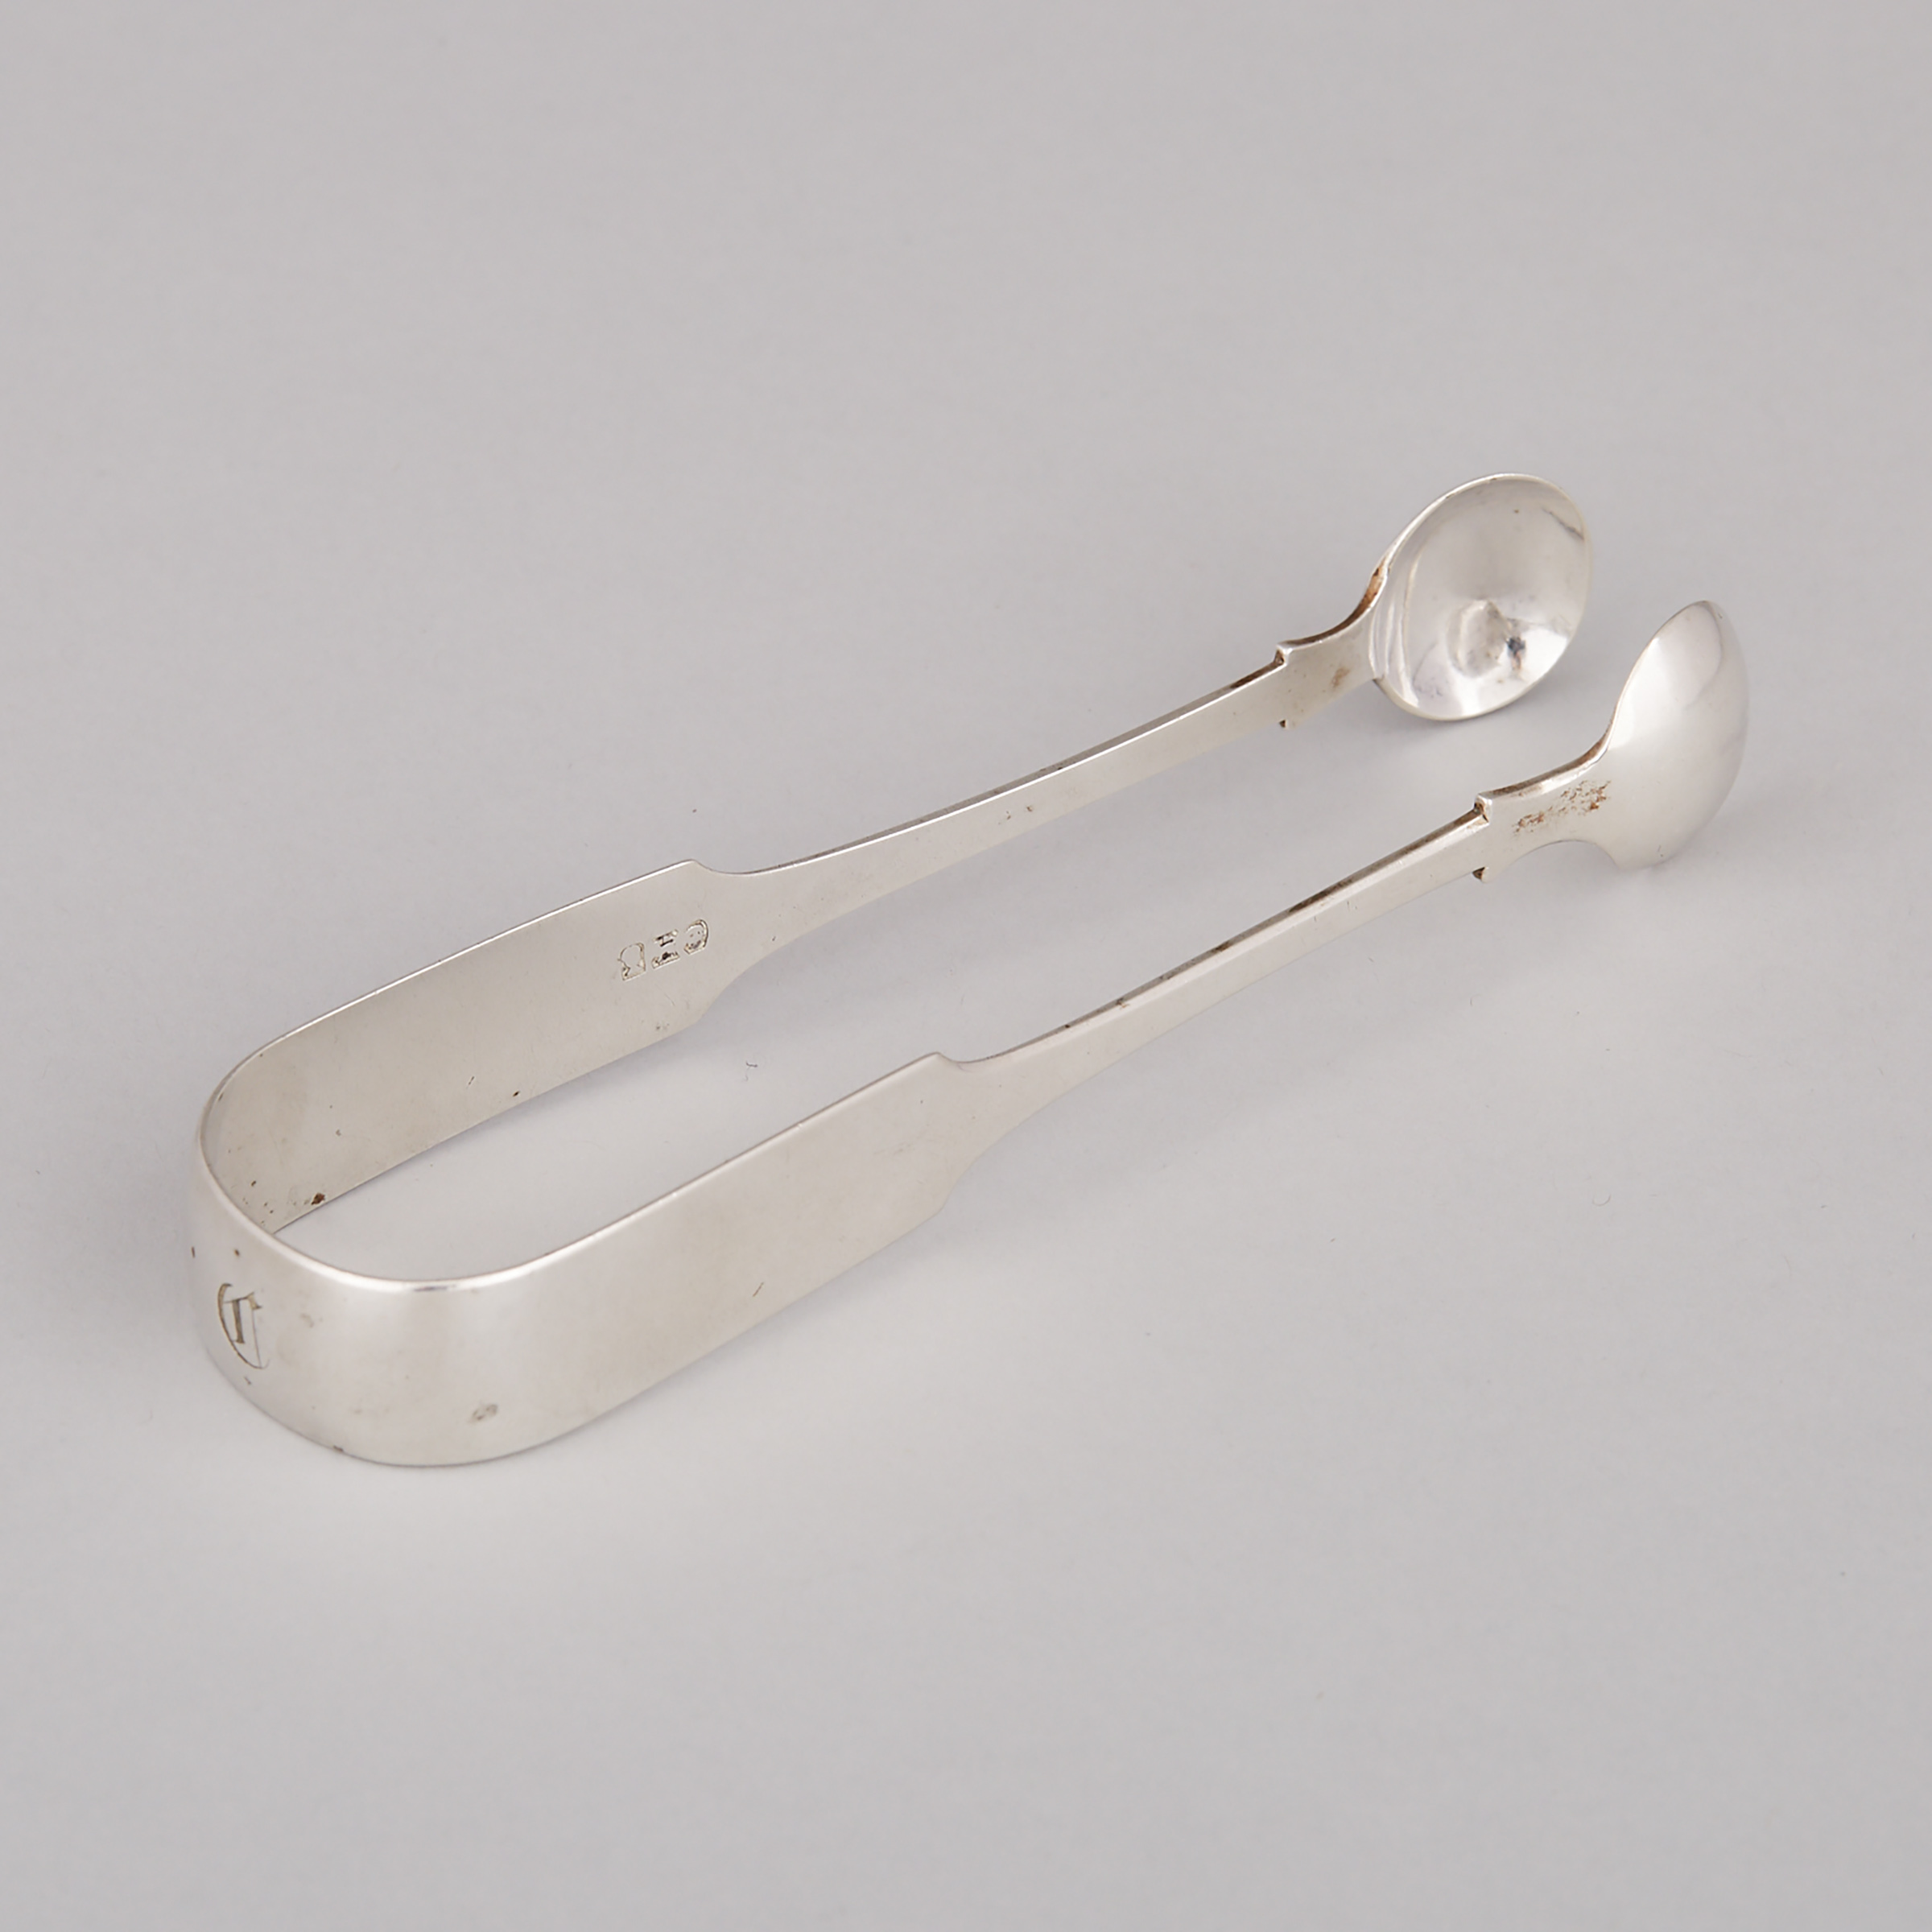 Canadian Silver Fiddle Pattern Sugar Tongs, George Savage, Montreal, Que., c.1843-50